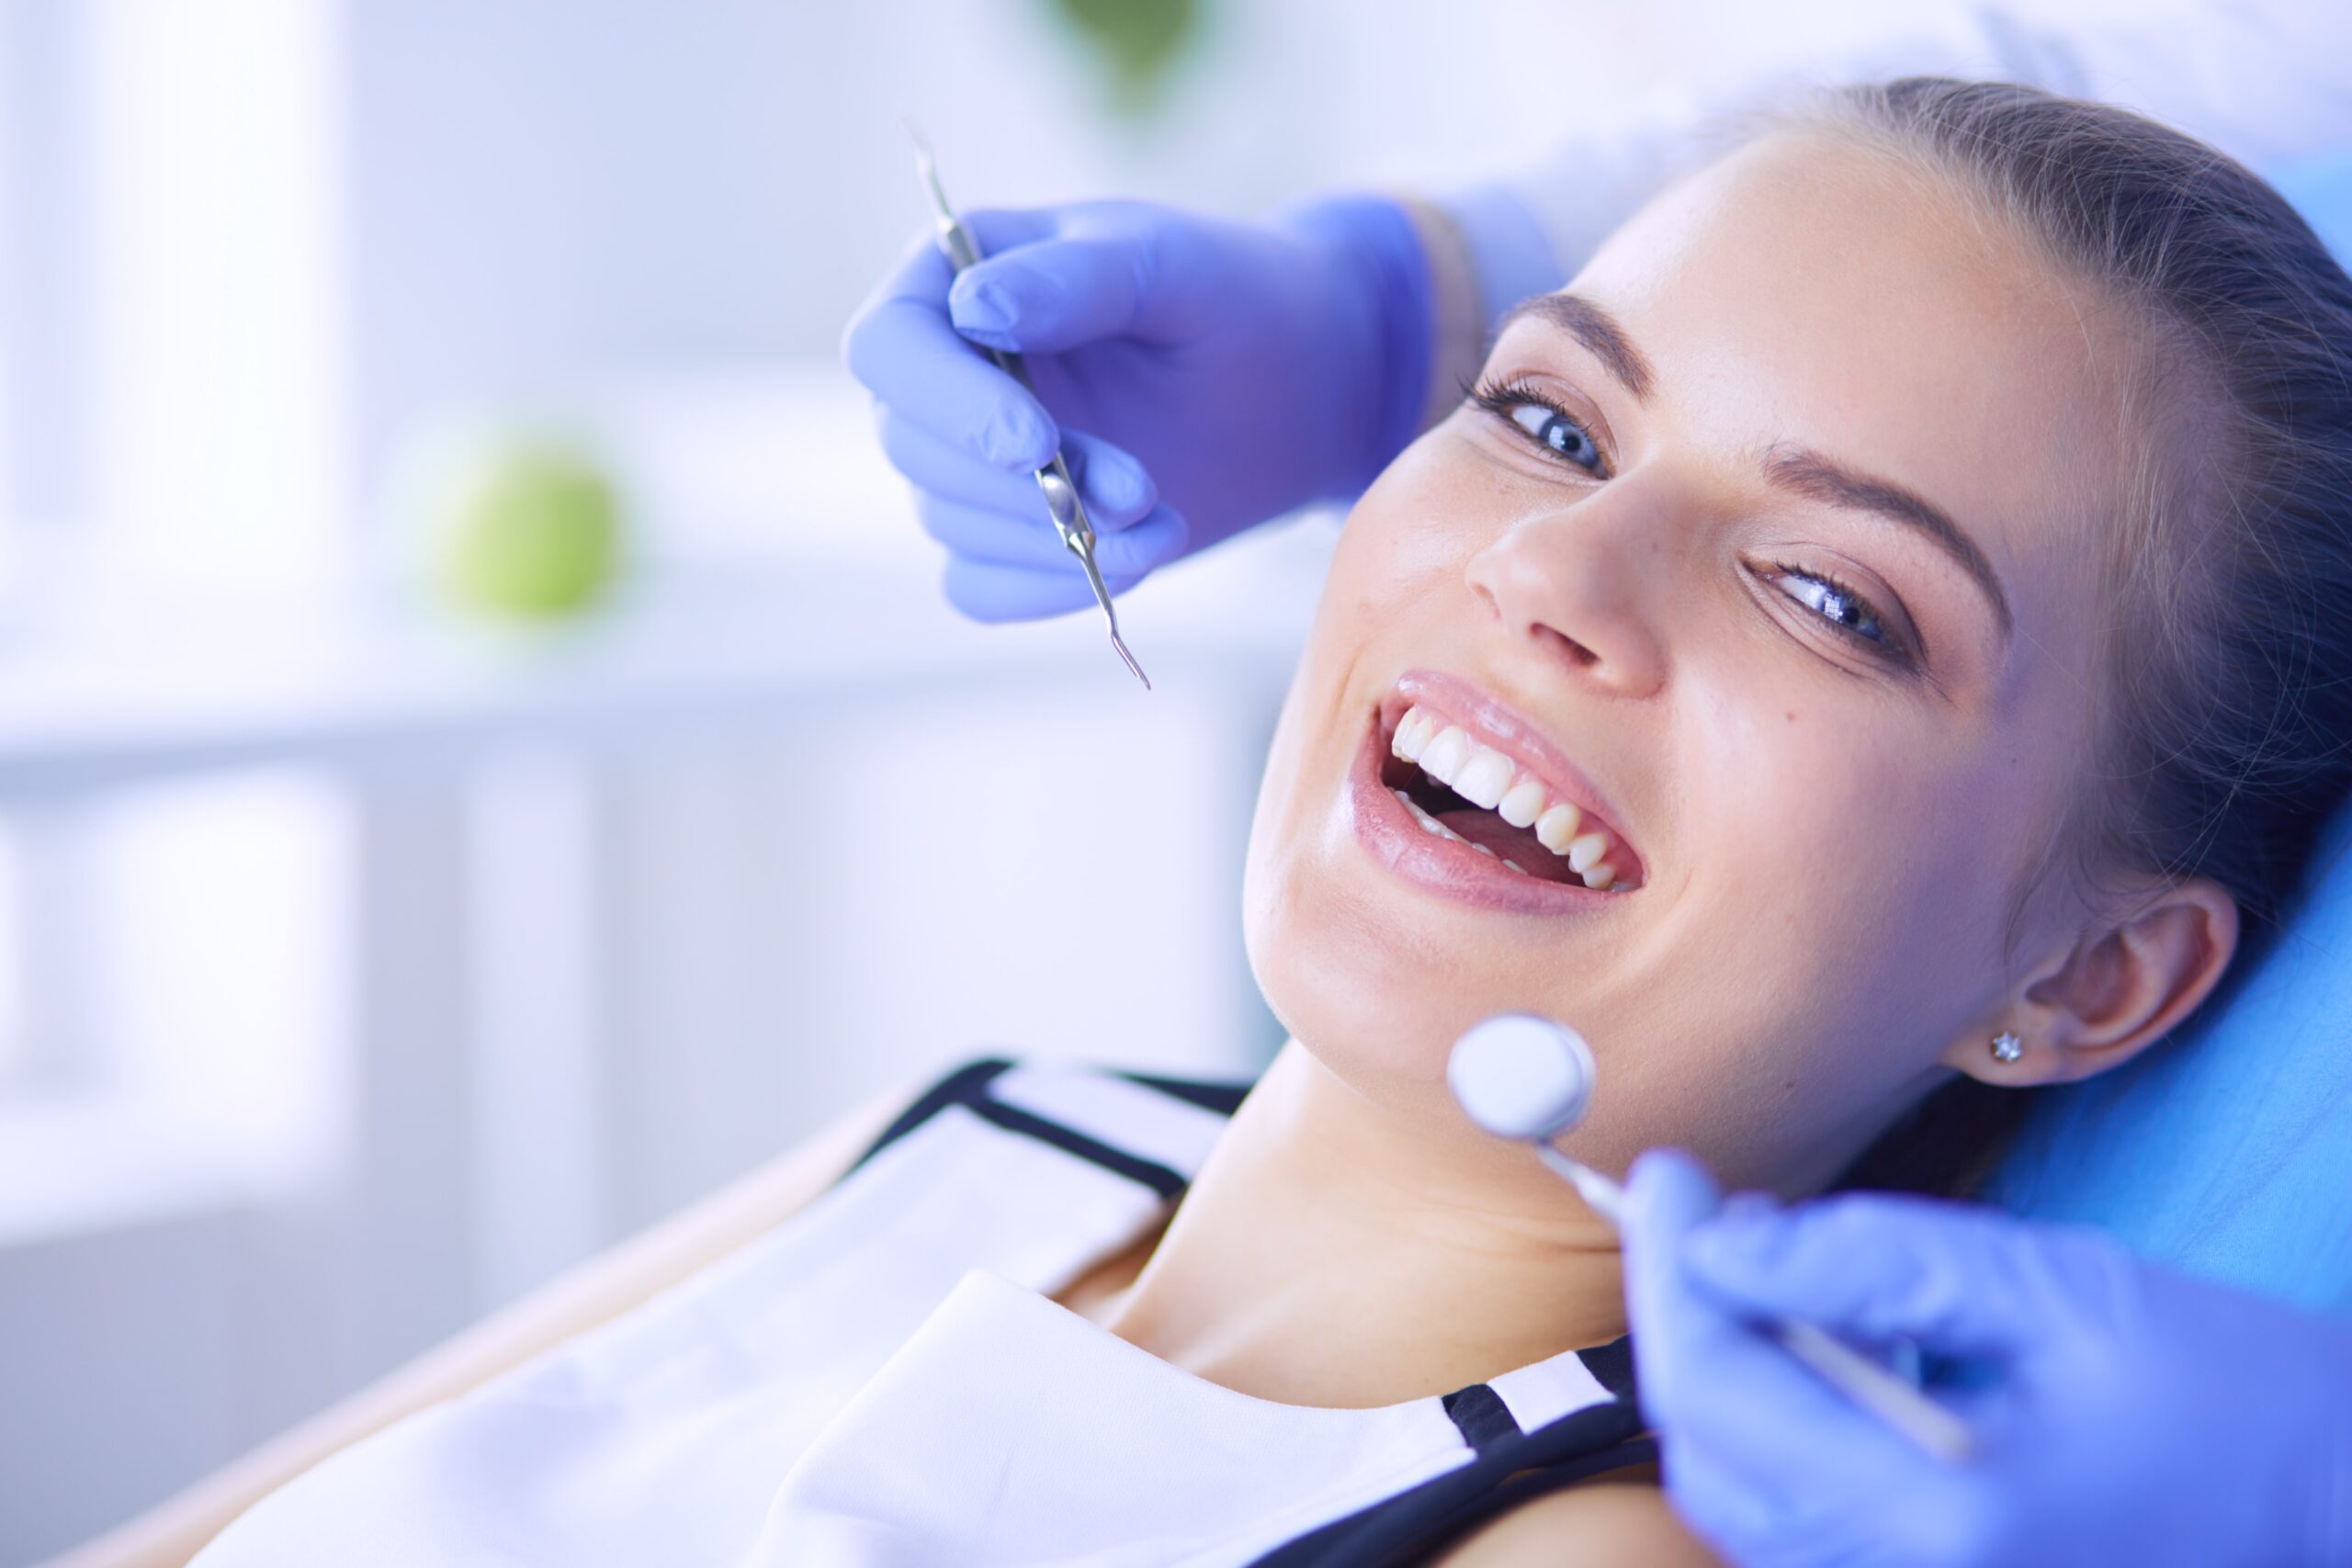 3 Questions to Ask When Going to a New Dentist